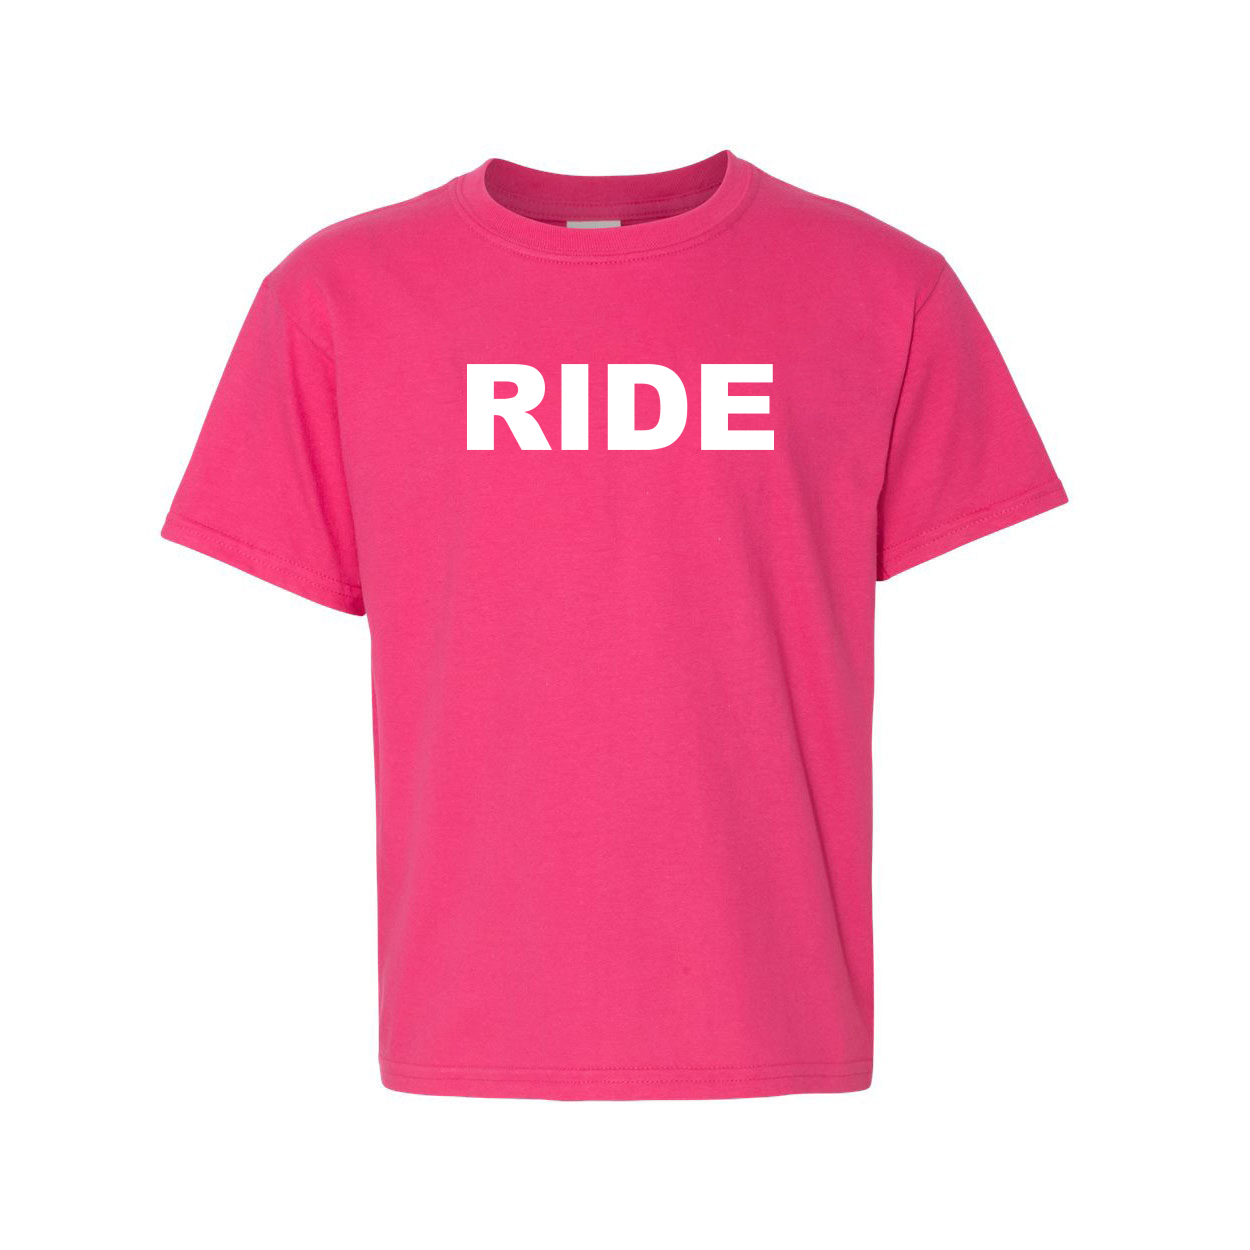 Ride Brand Logo Classic Youth T-Shirt Pink